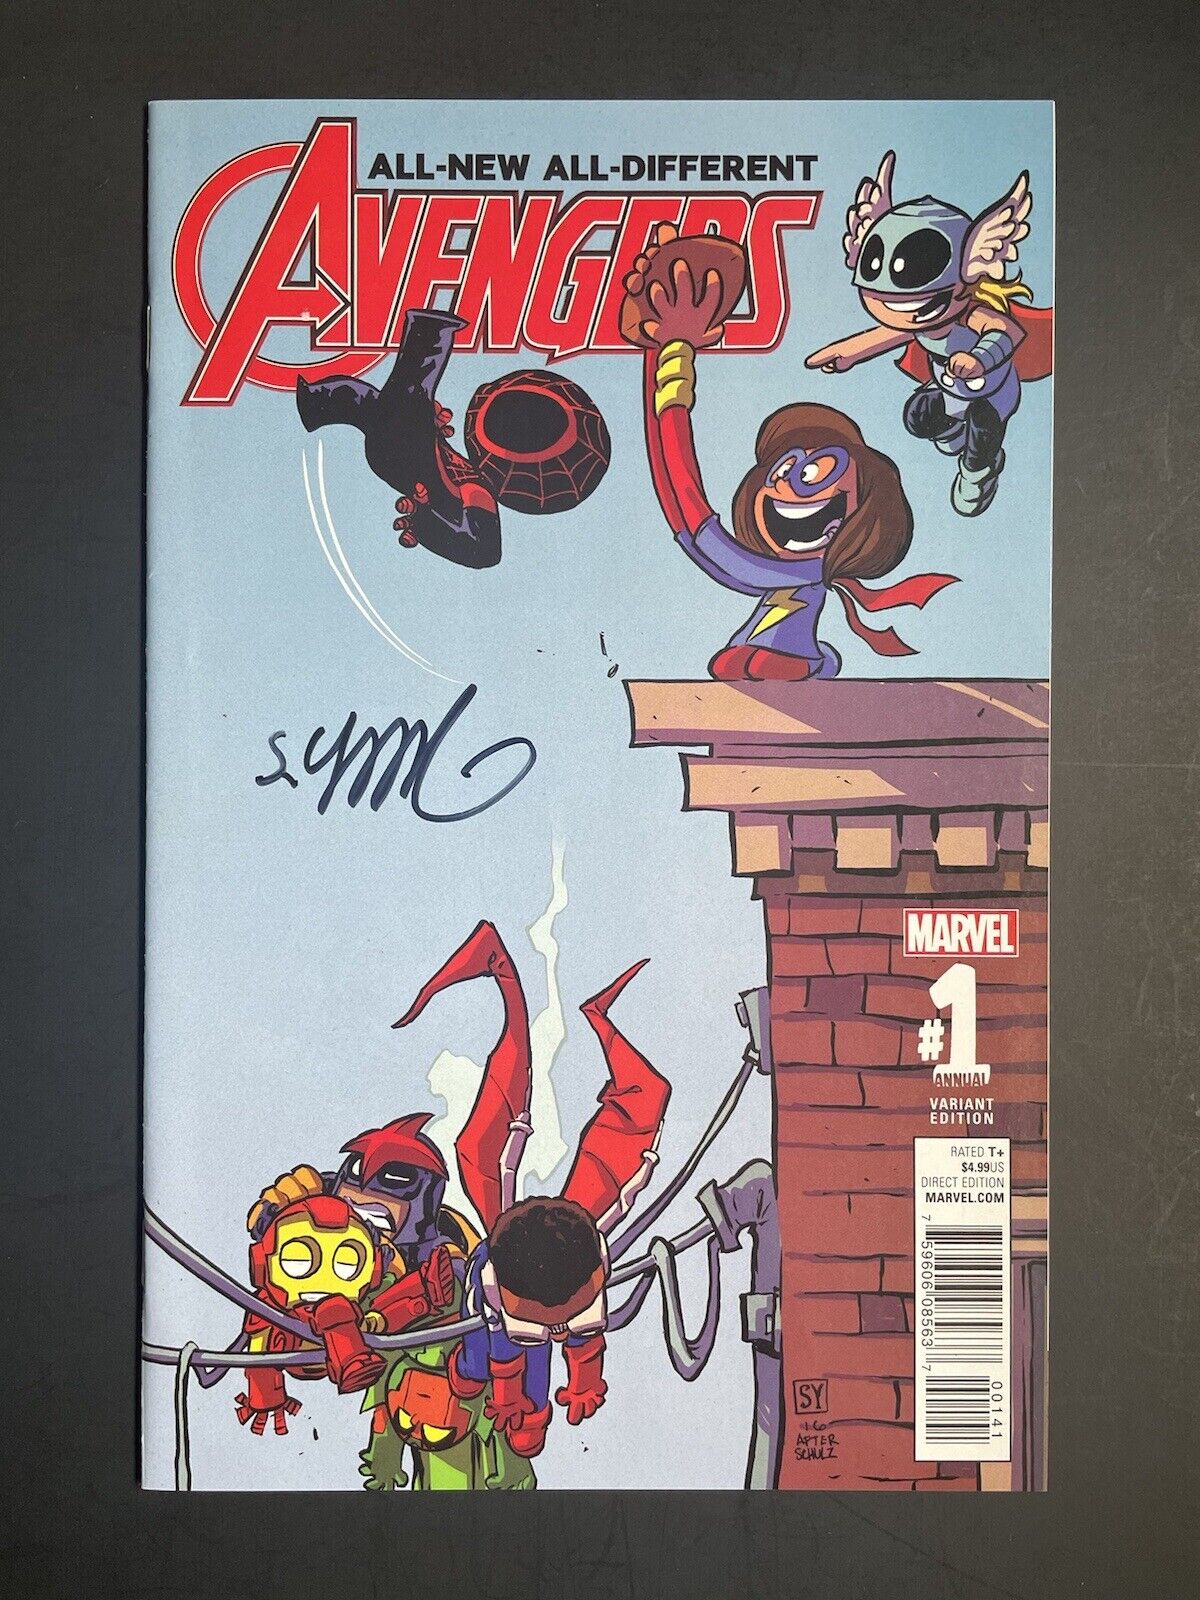 All-New All-Different Avengers Annual 1 Skottie Young signed Marvel Comics VF/NM